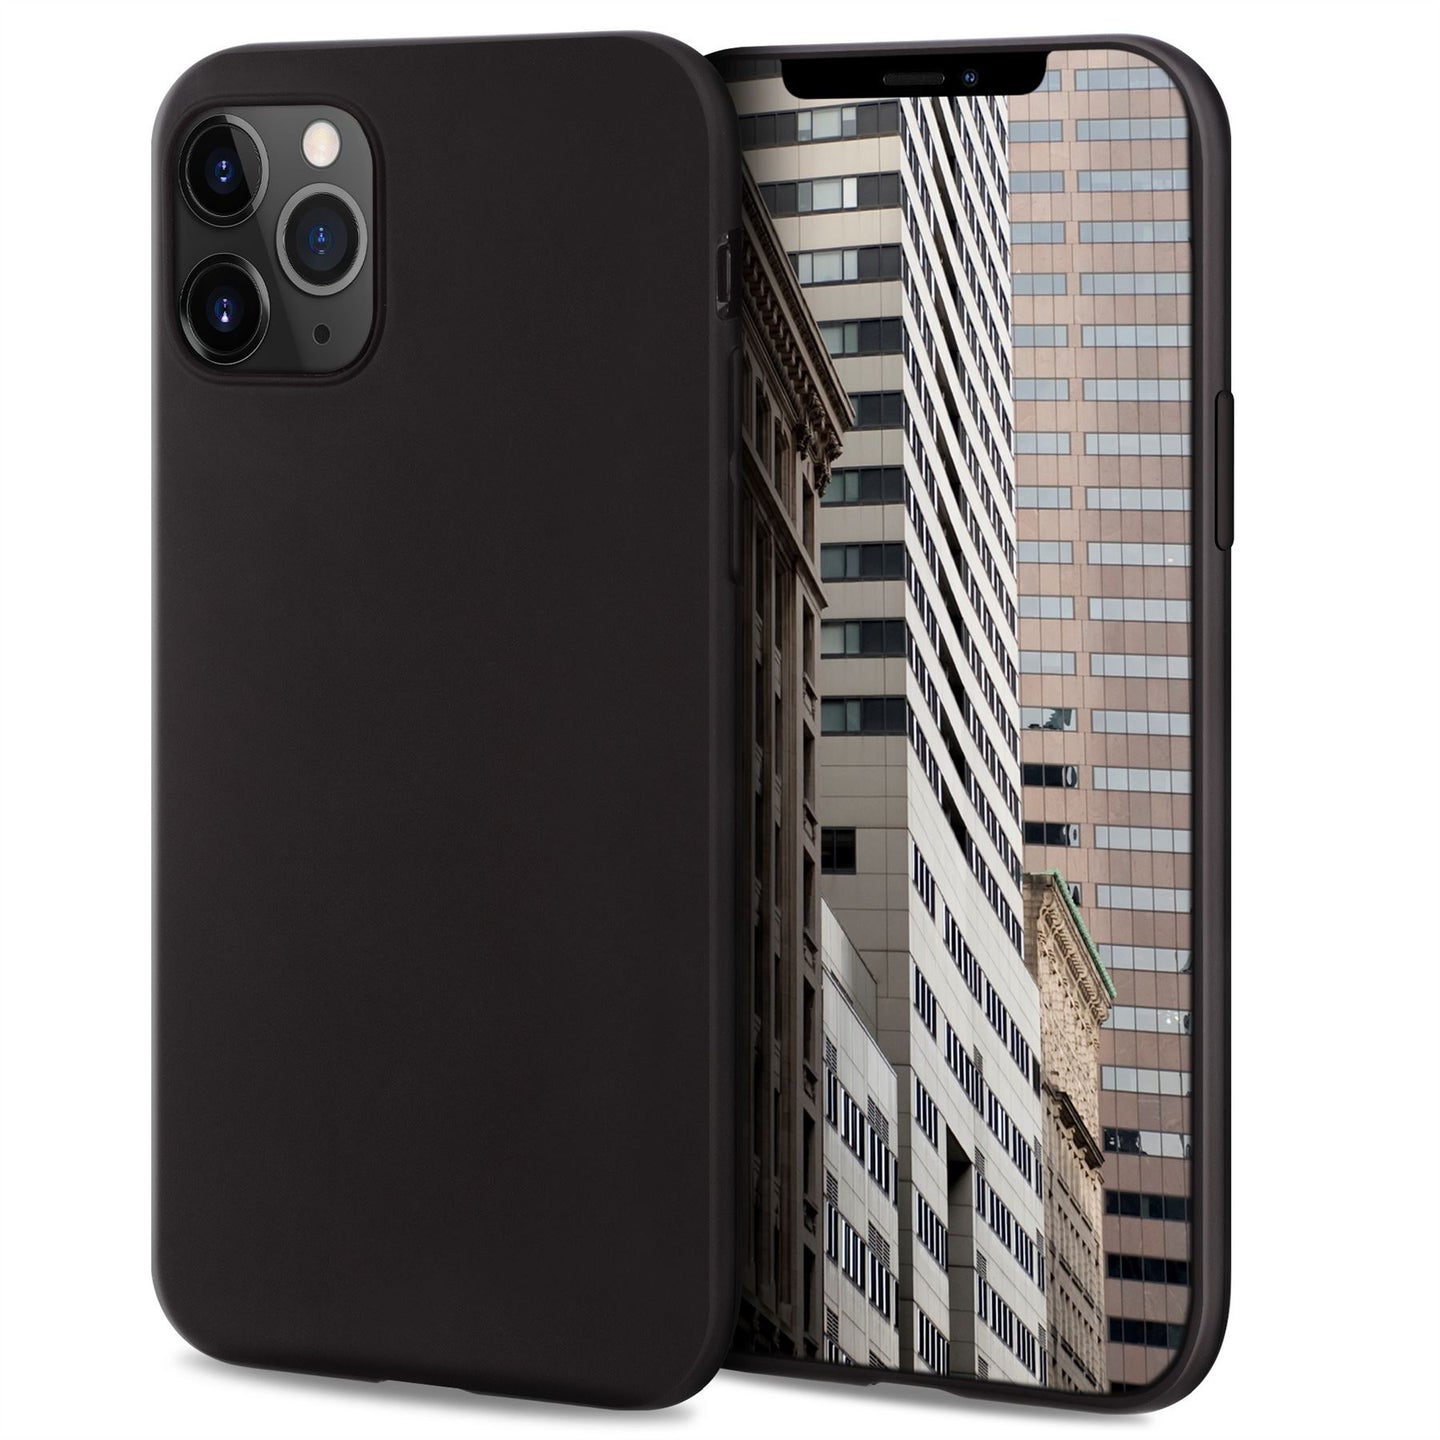 Moozy Lifestyle. Designed for iPhone 12 Pro Max Case, Black - Liquid Silicone Cover with Matte Finish and Soft Microfiber Lining